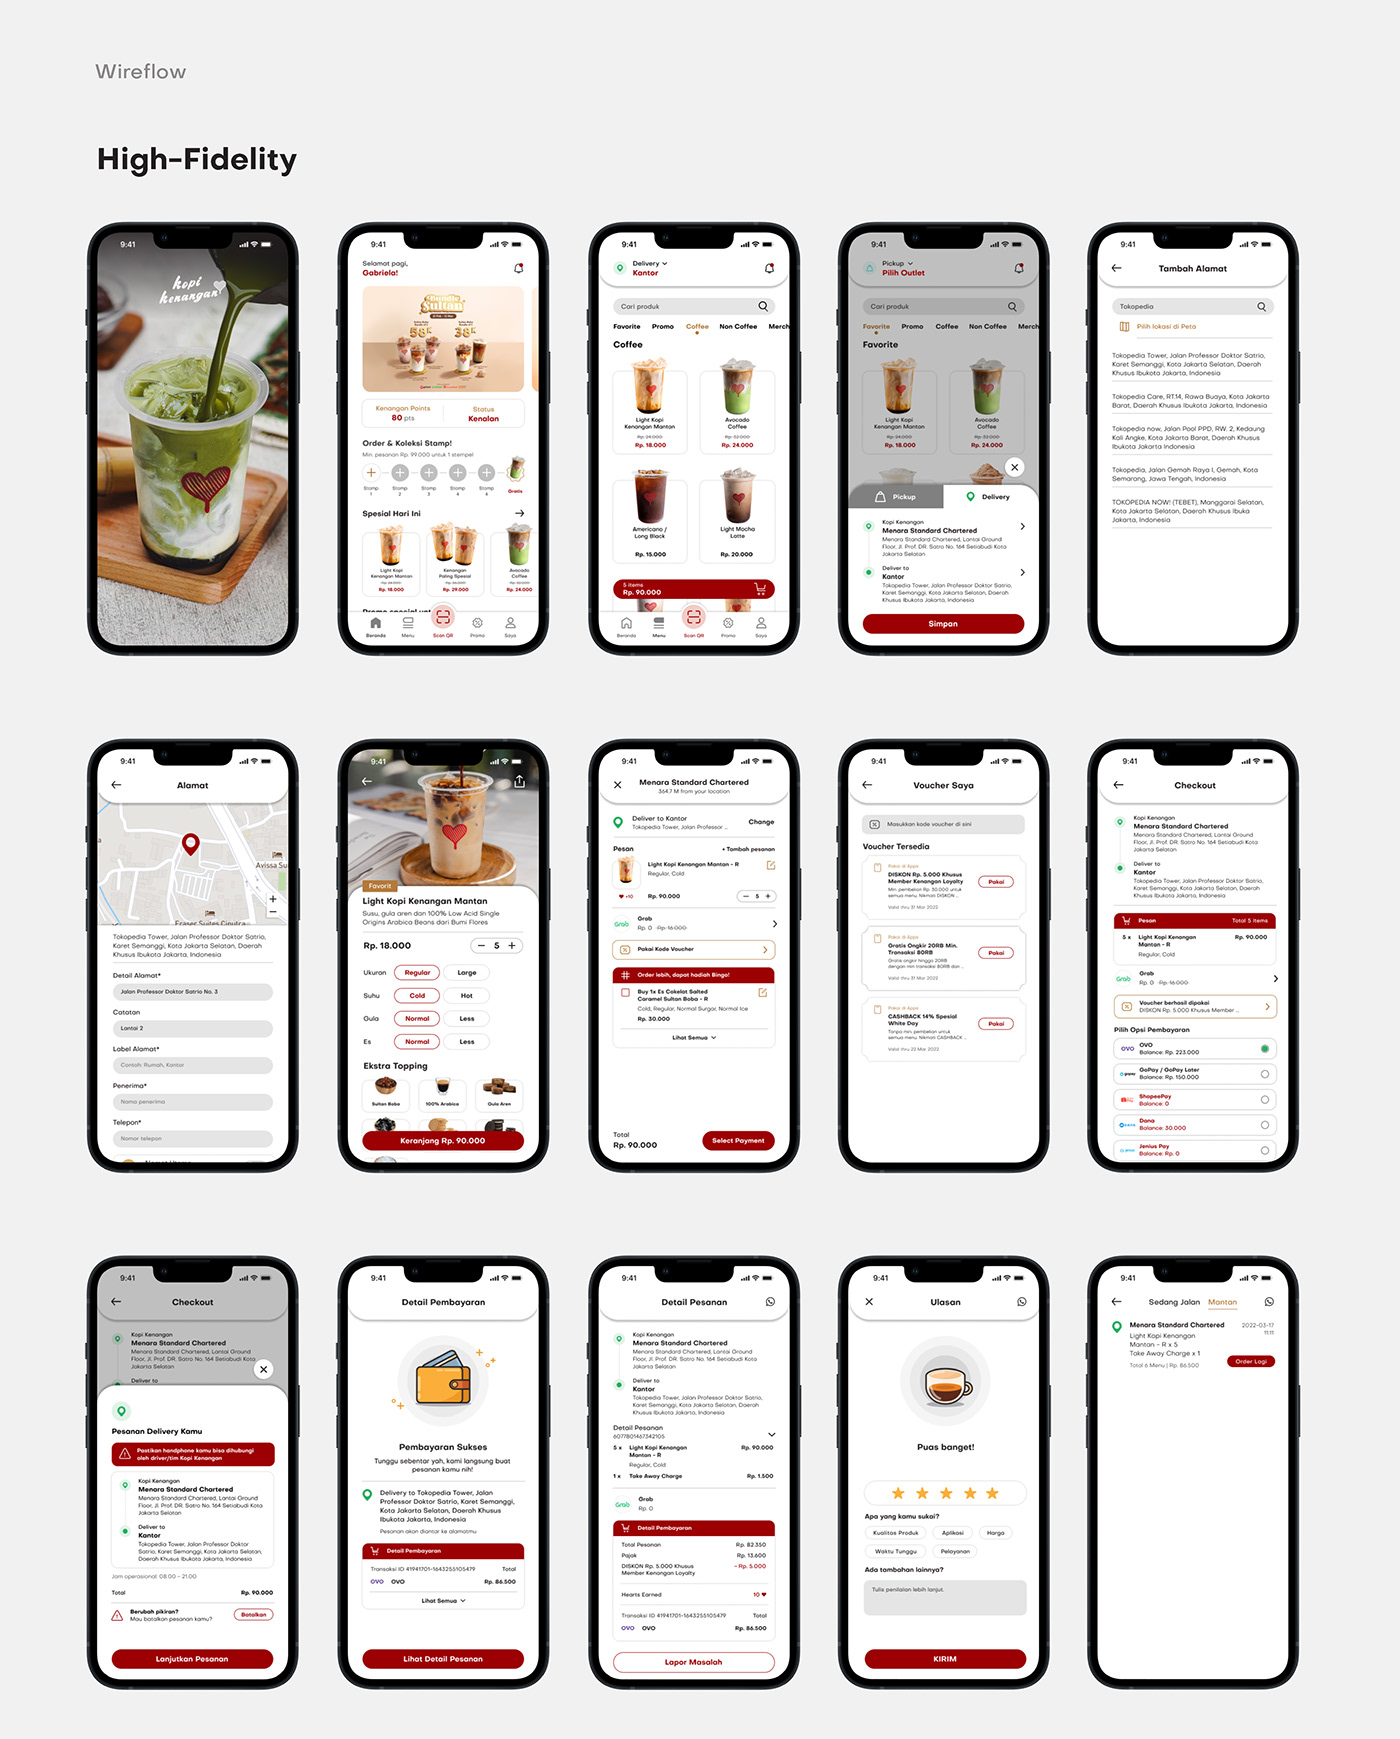 application Interface redesign study case UI uiux uiuxdesign user experience user interface ux